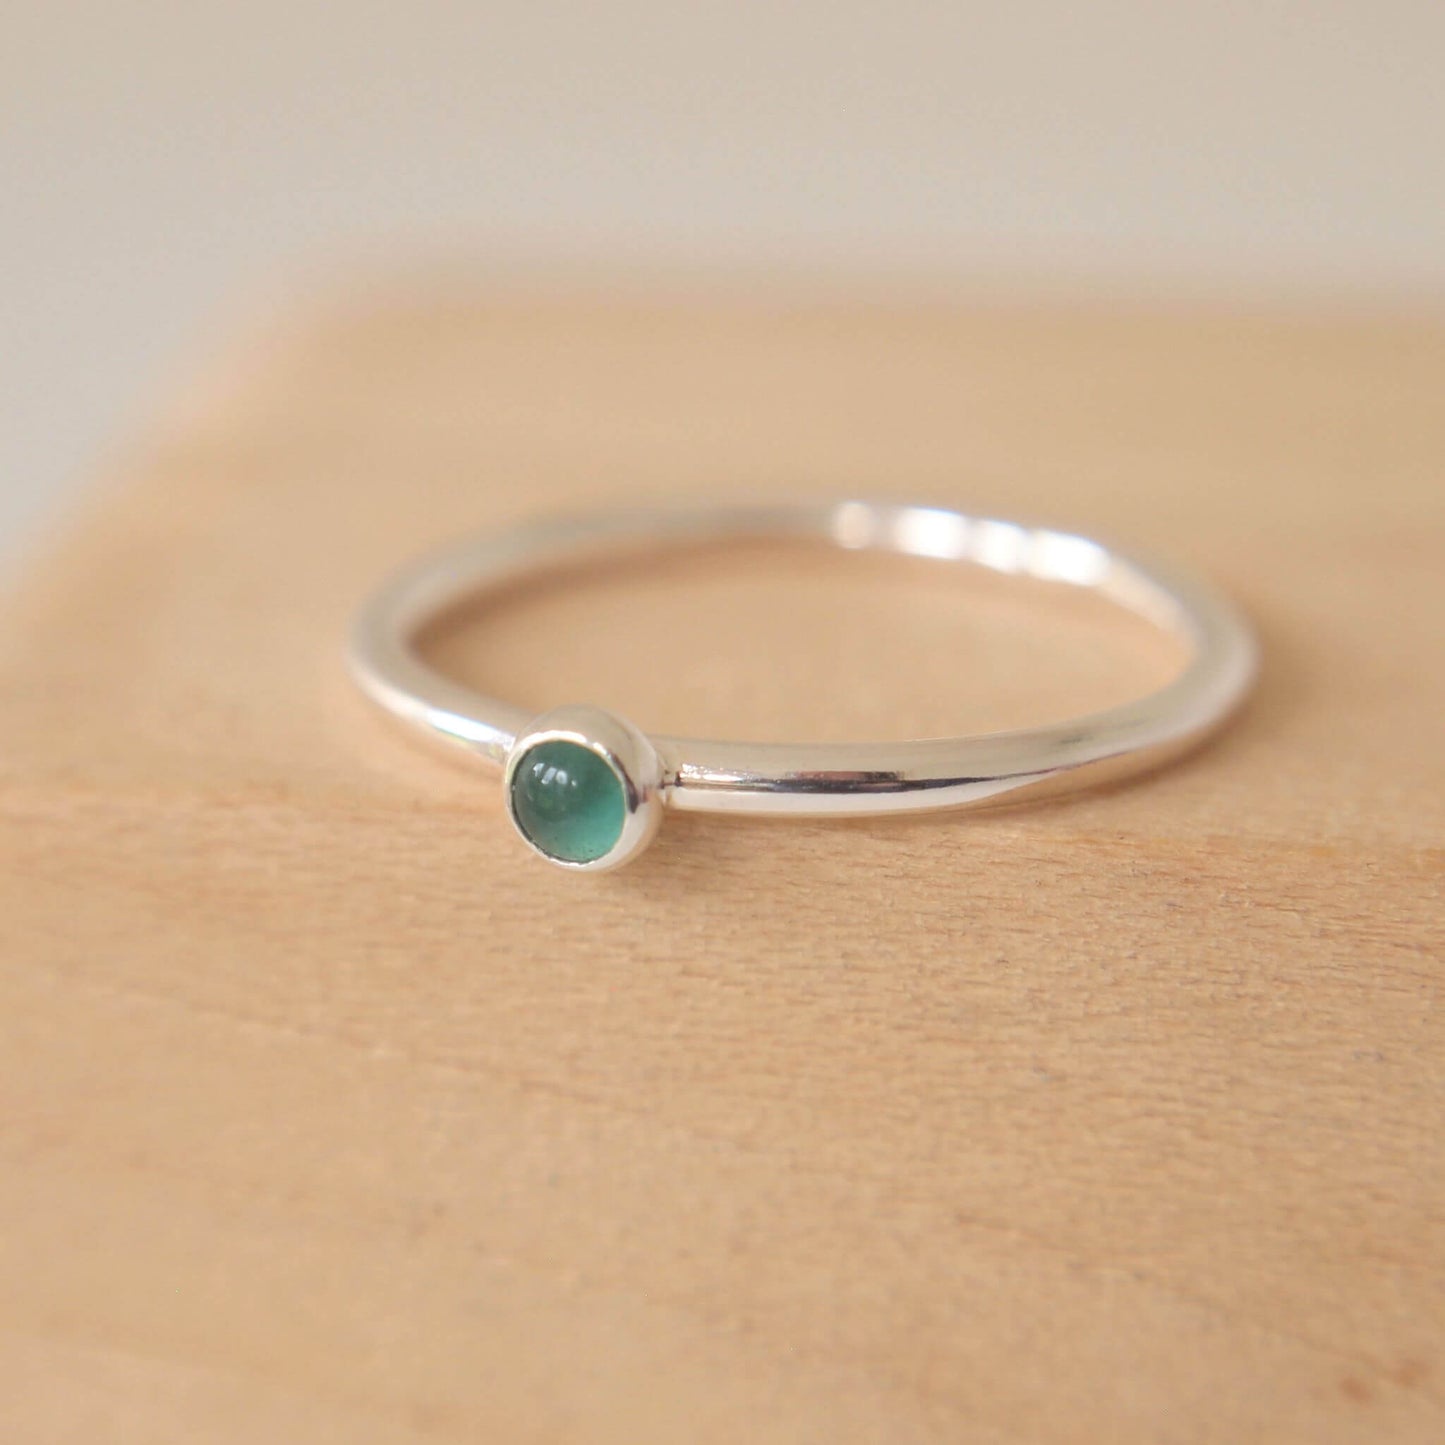 Green Agate Ring. A 3mm round cabochon emerald Green Agate, birthstone for May  set very simply onto a round band of sterling silver. handmade by maram jewellery in Scotland